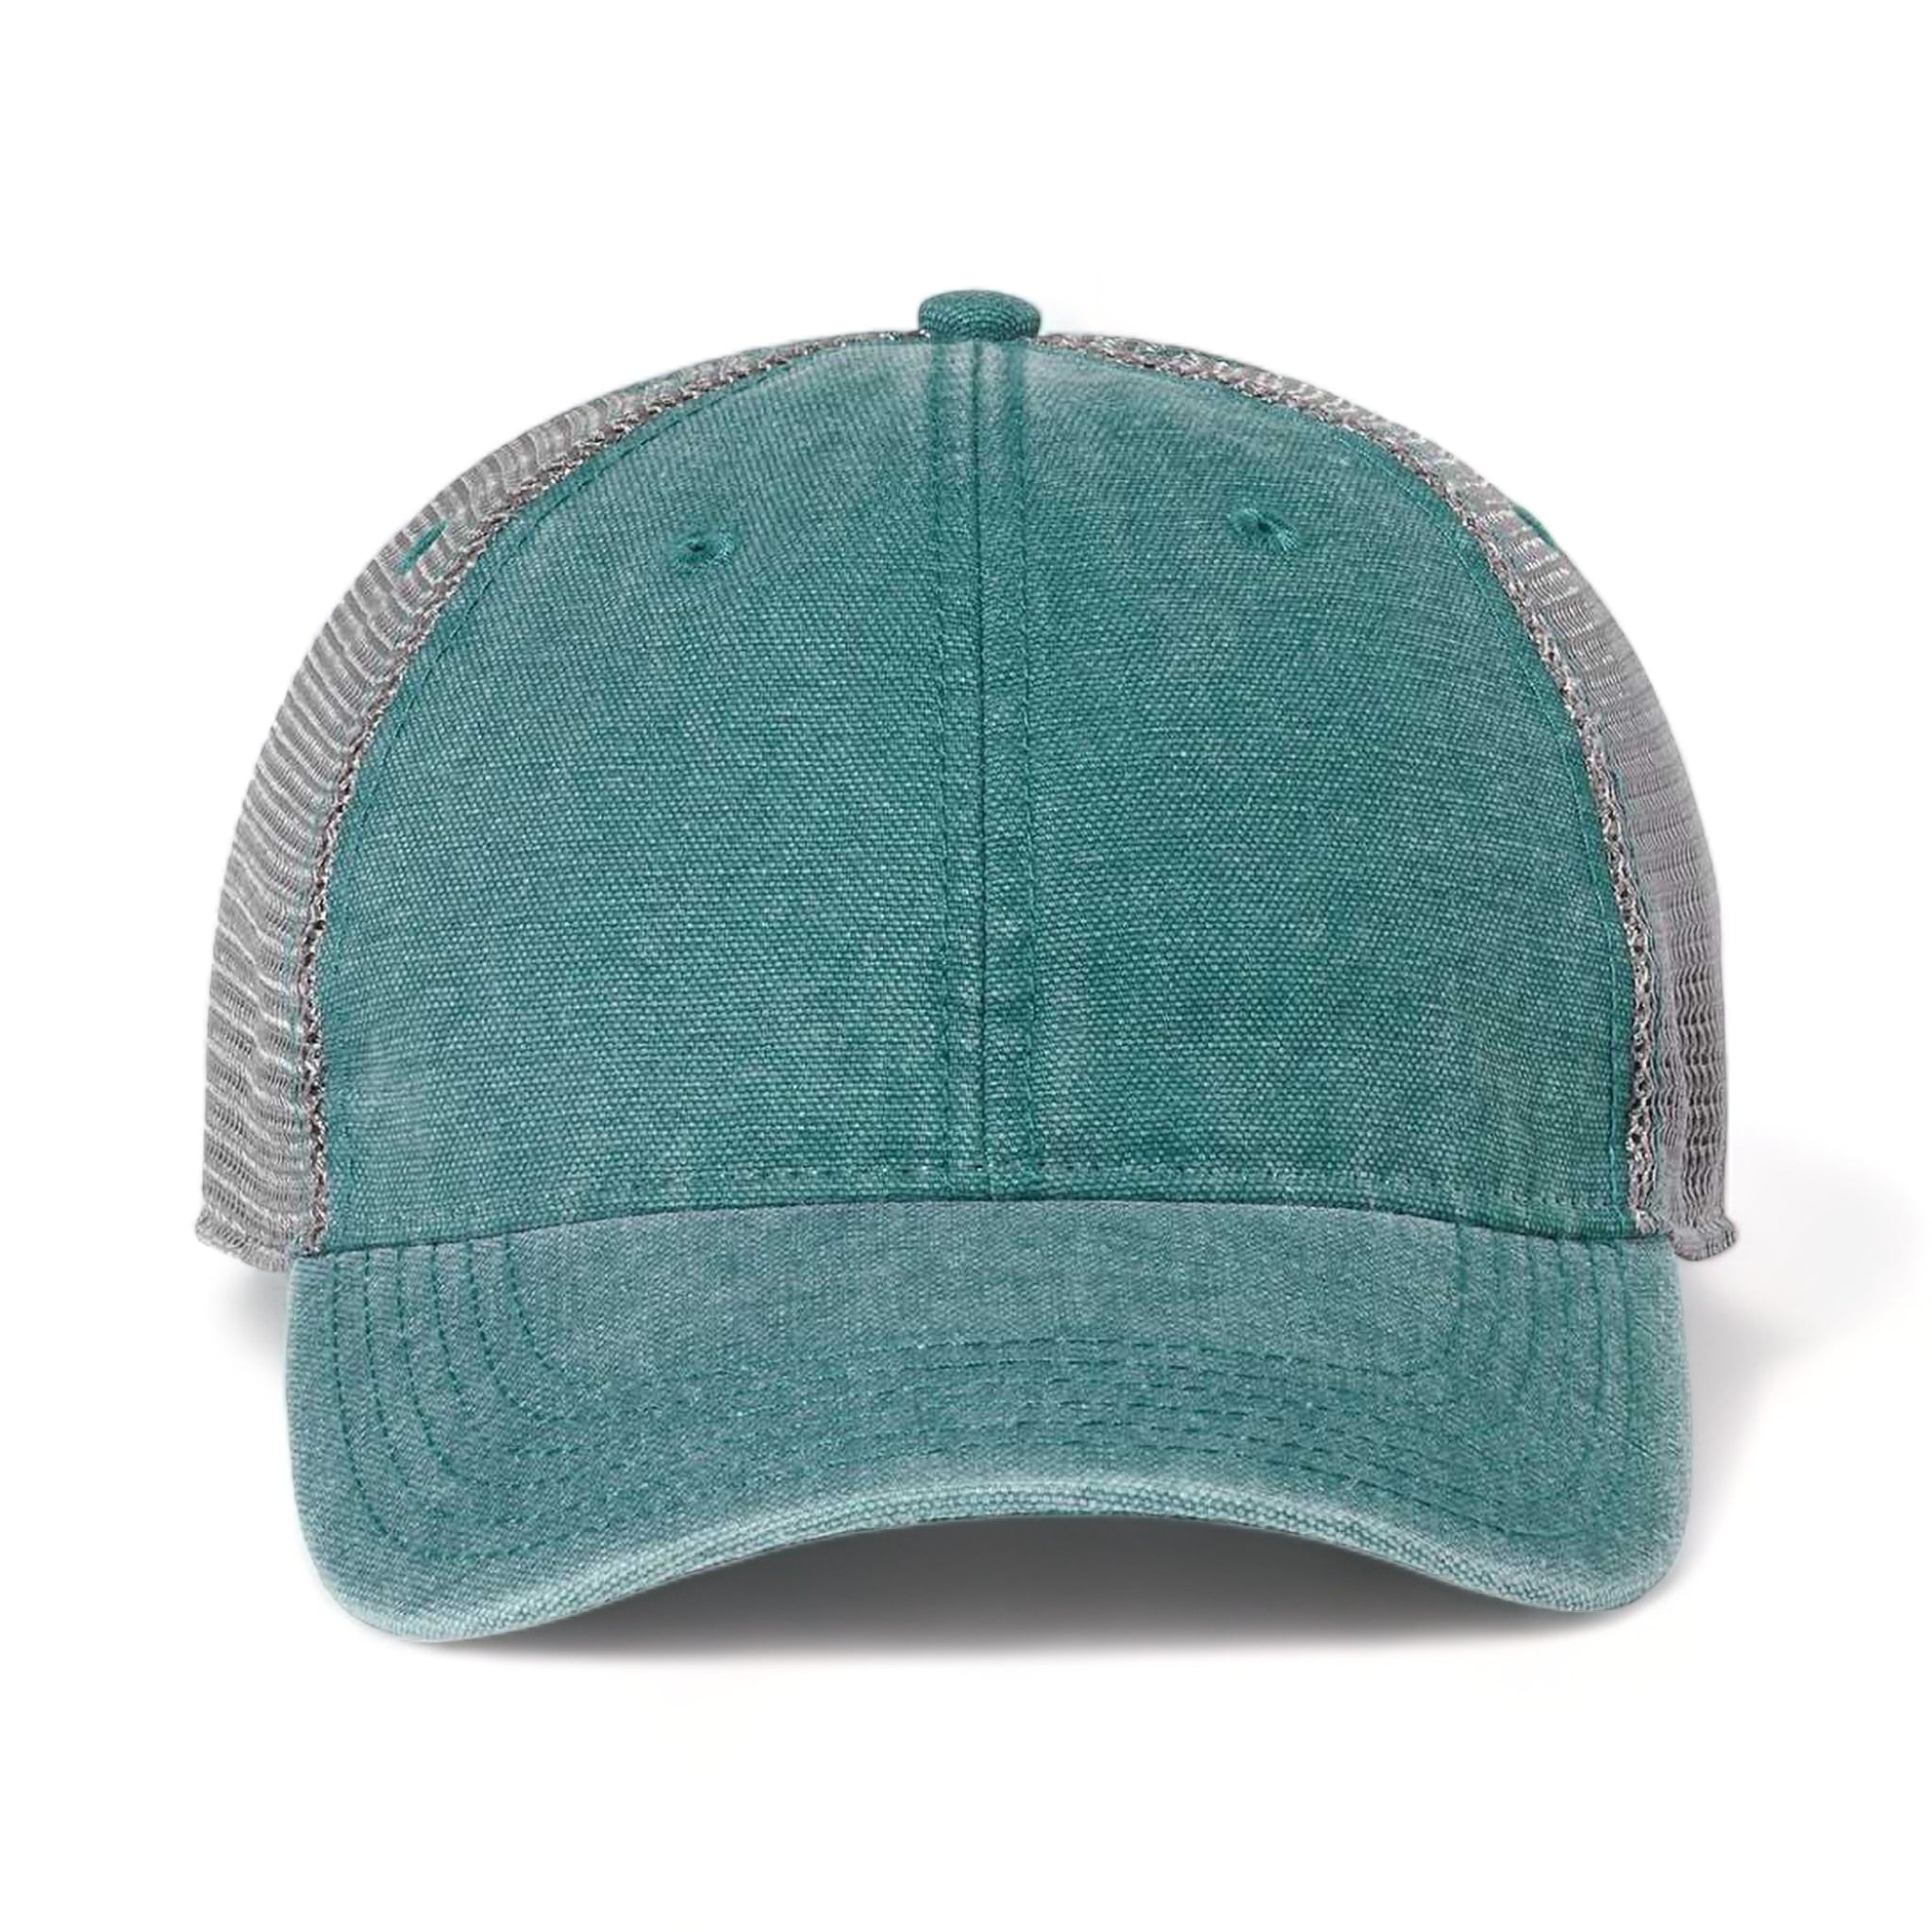 Front view of LEGACY DTA custom hat in marine blue and grey